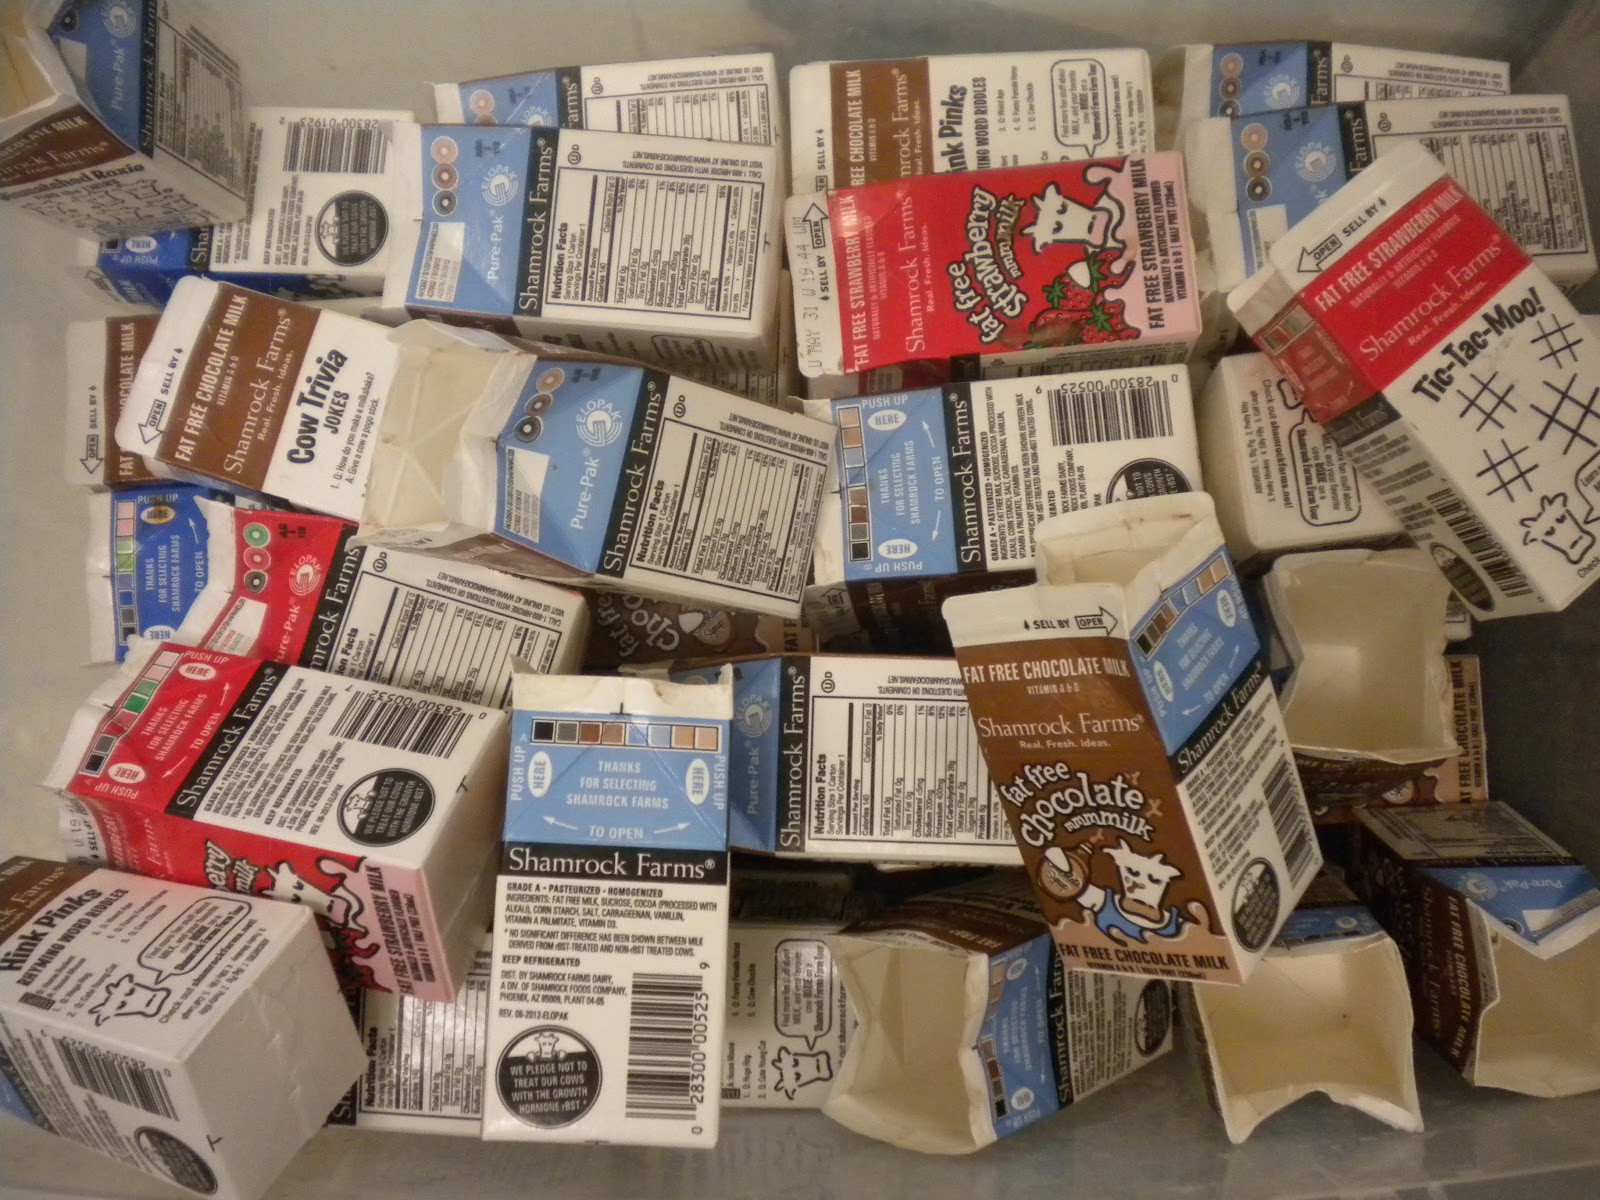 Milk cartons are often readily available in our schools!